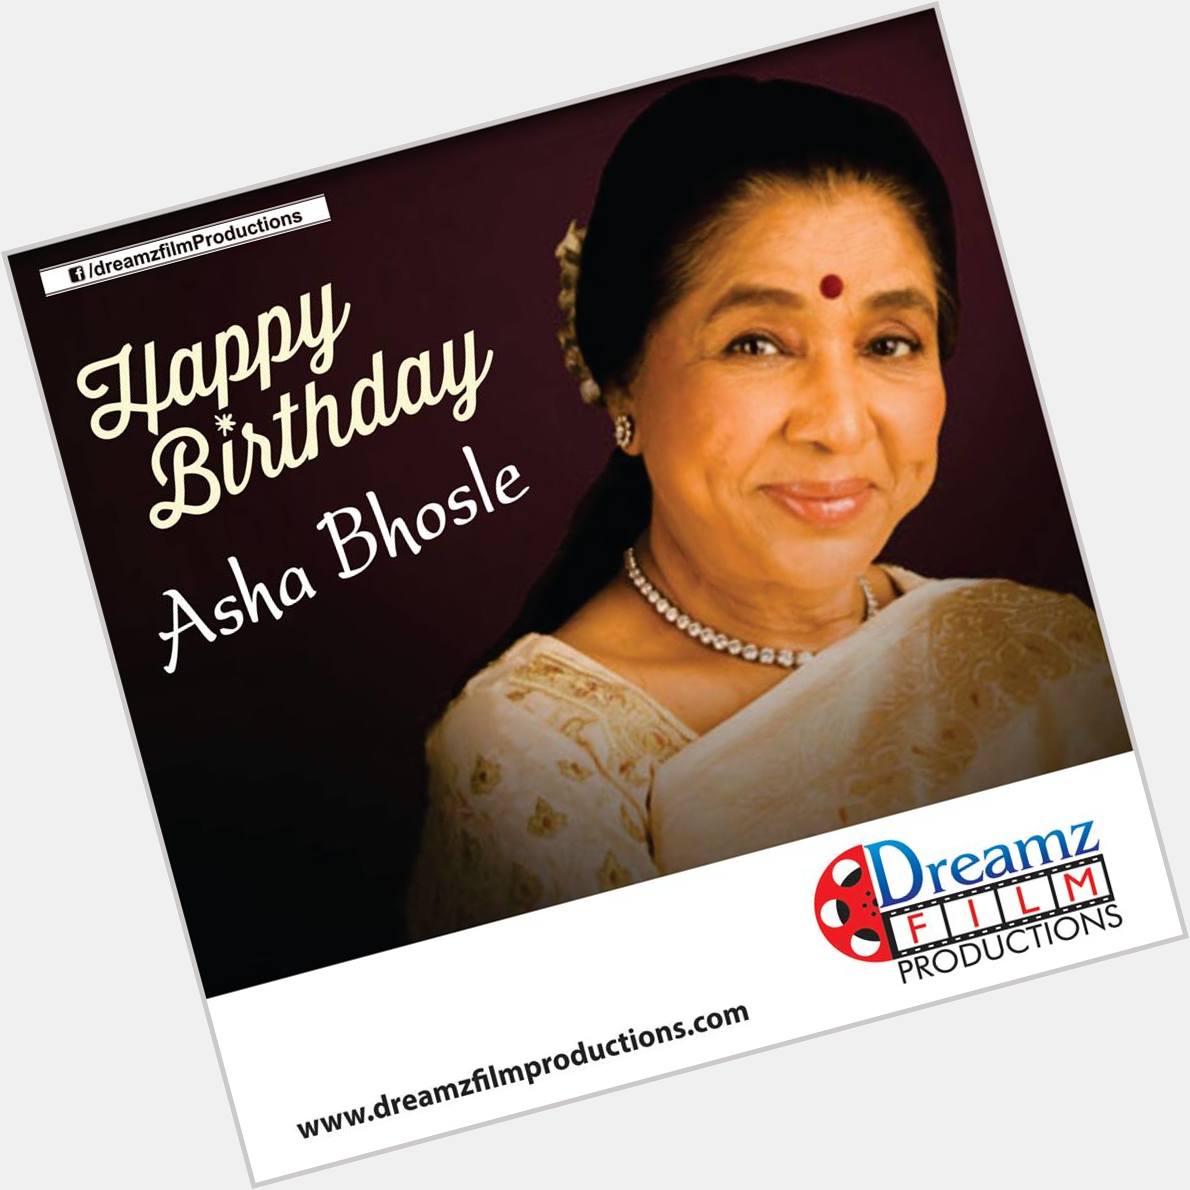  wishes a very  to Asha Bhosle (Famous Playback singer) 